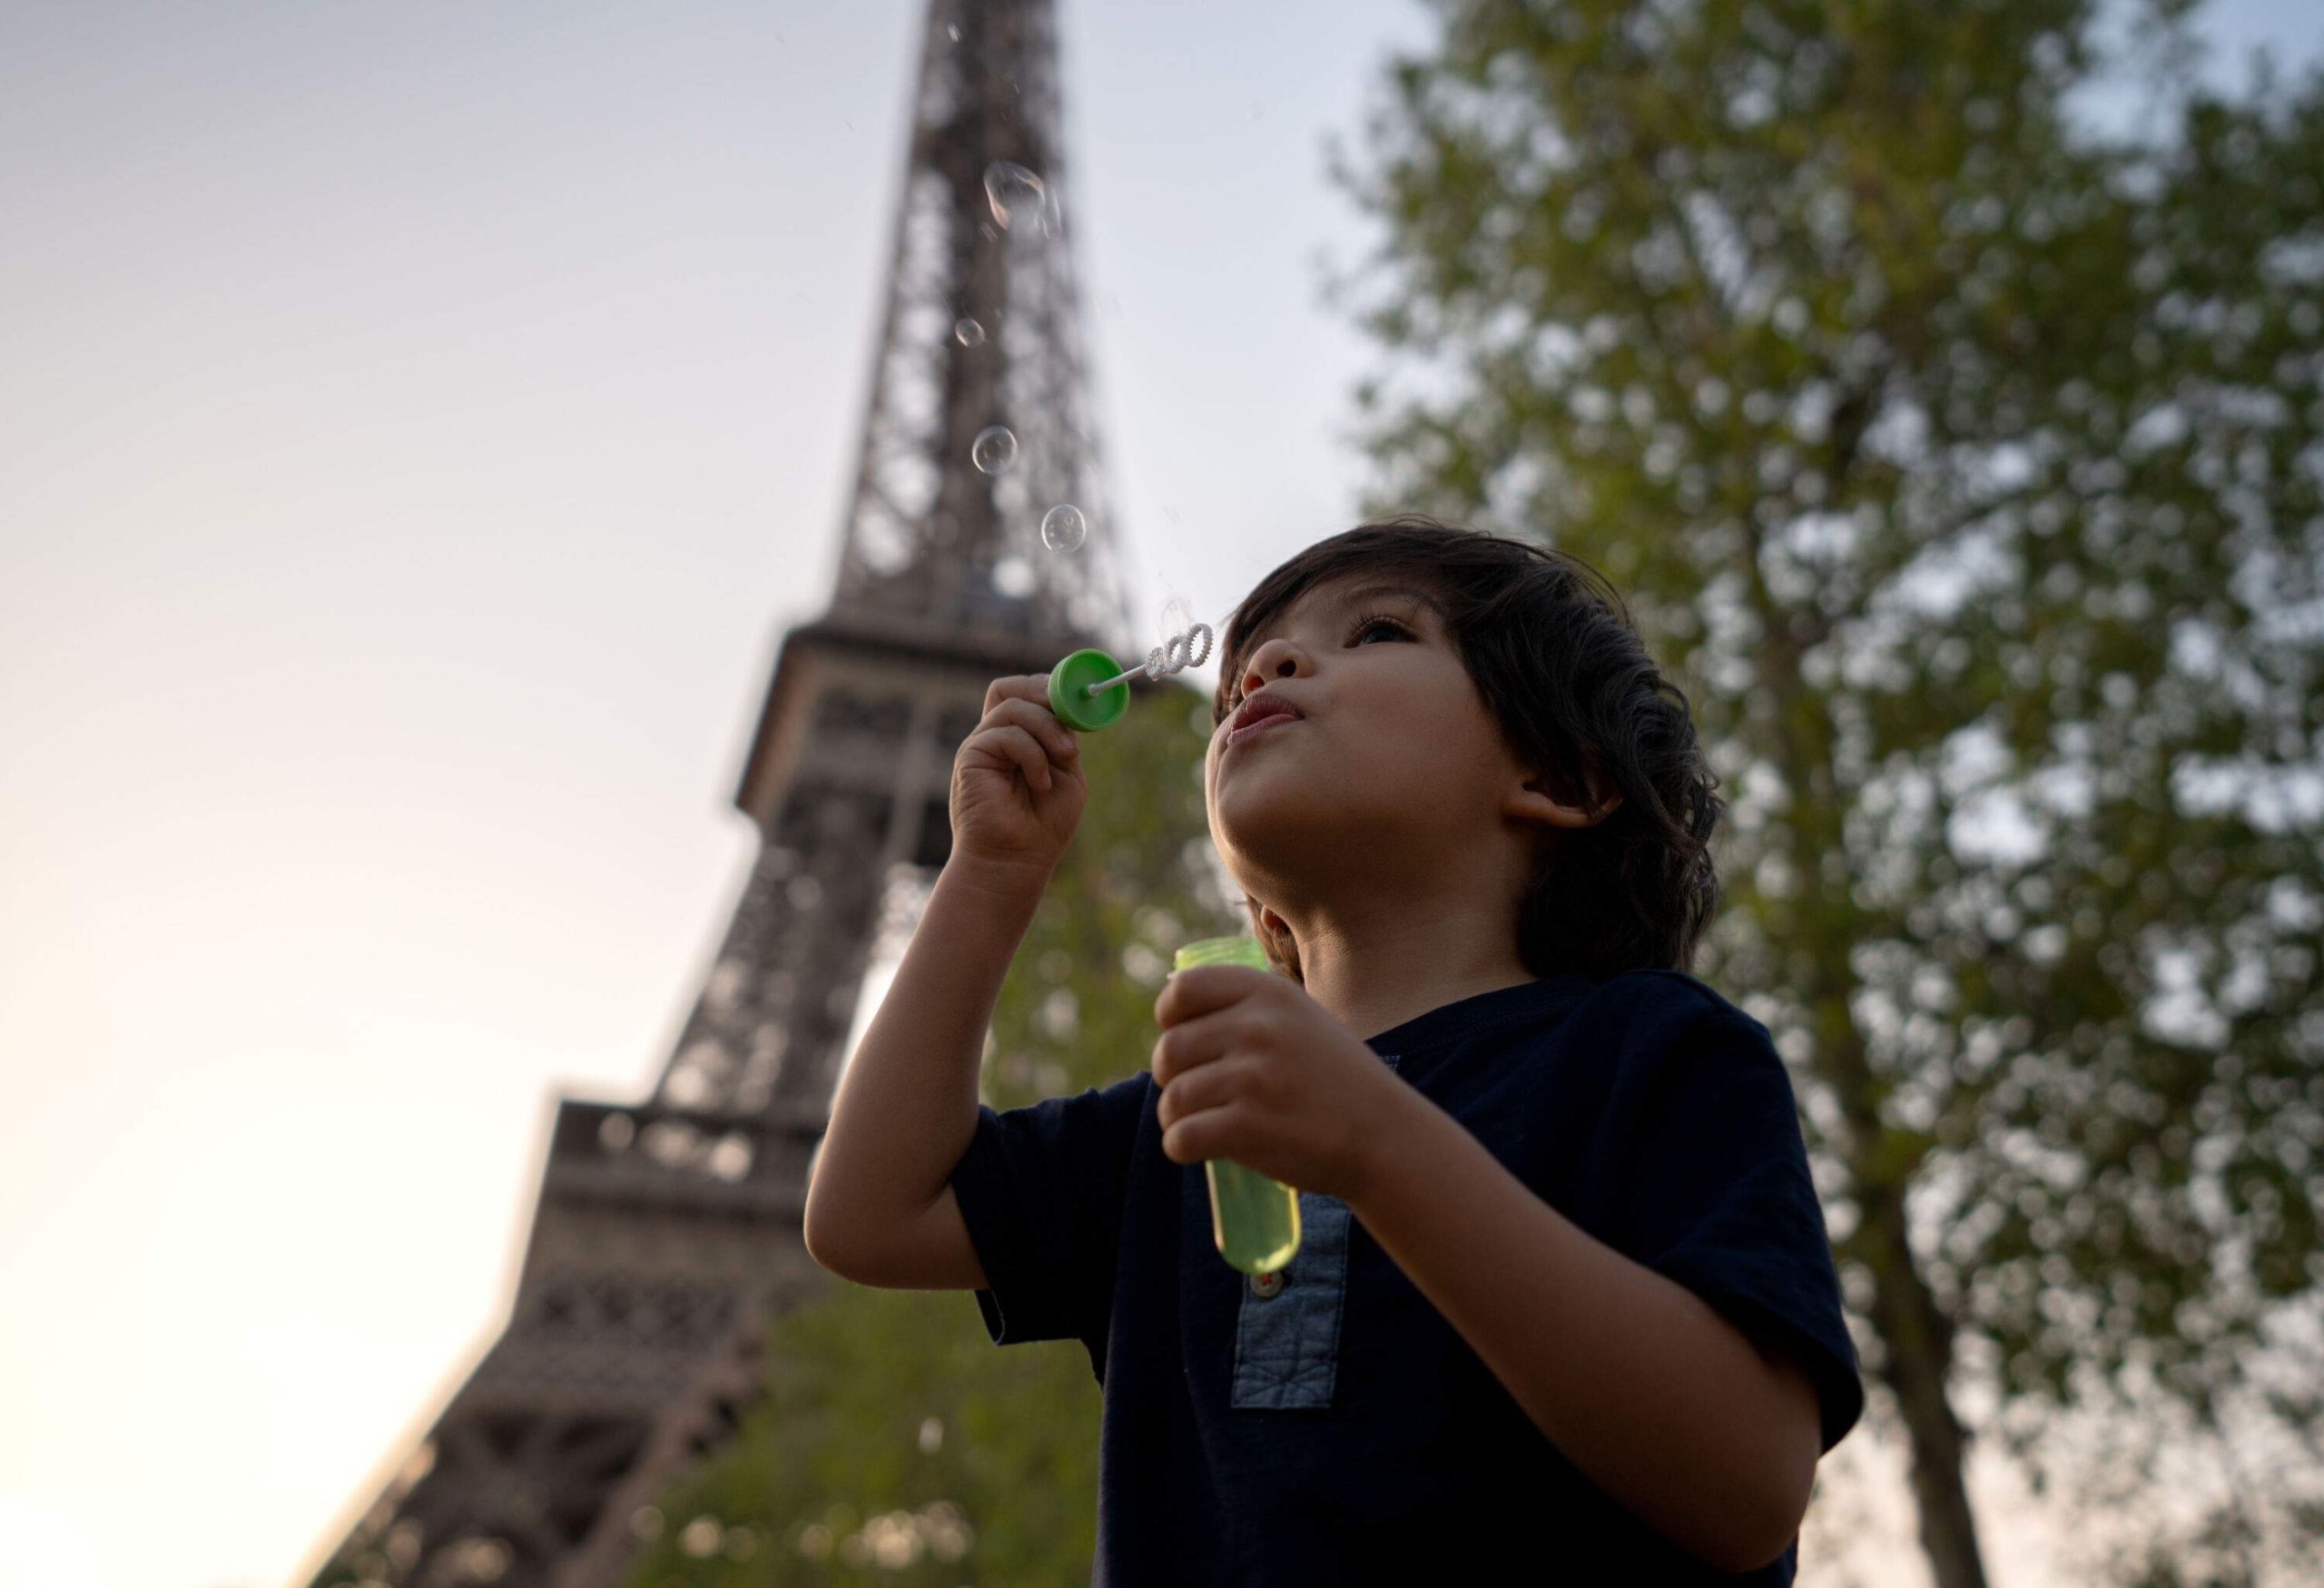 A little boy is blowing bubbles with the Eiffel tower in the background.